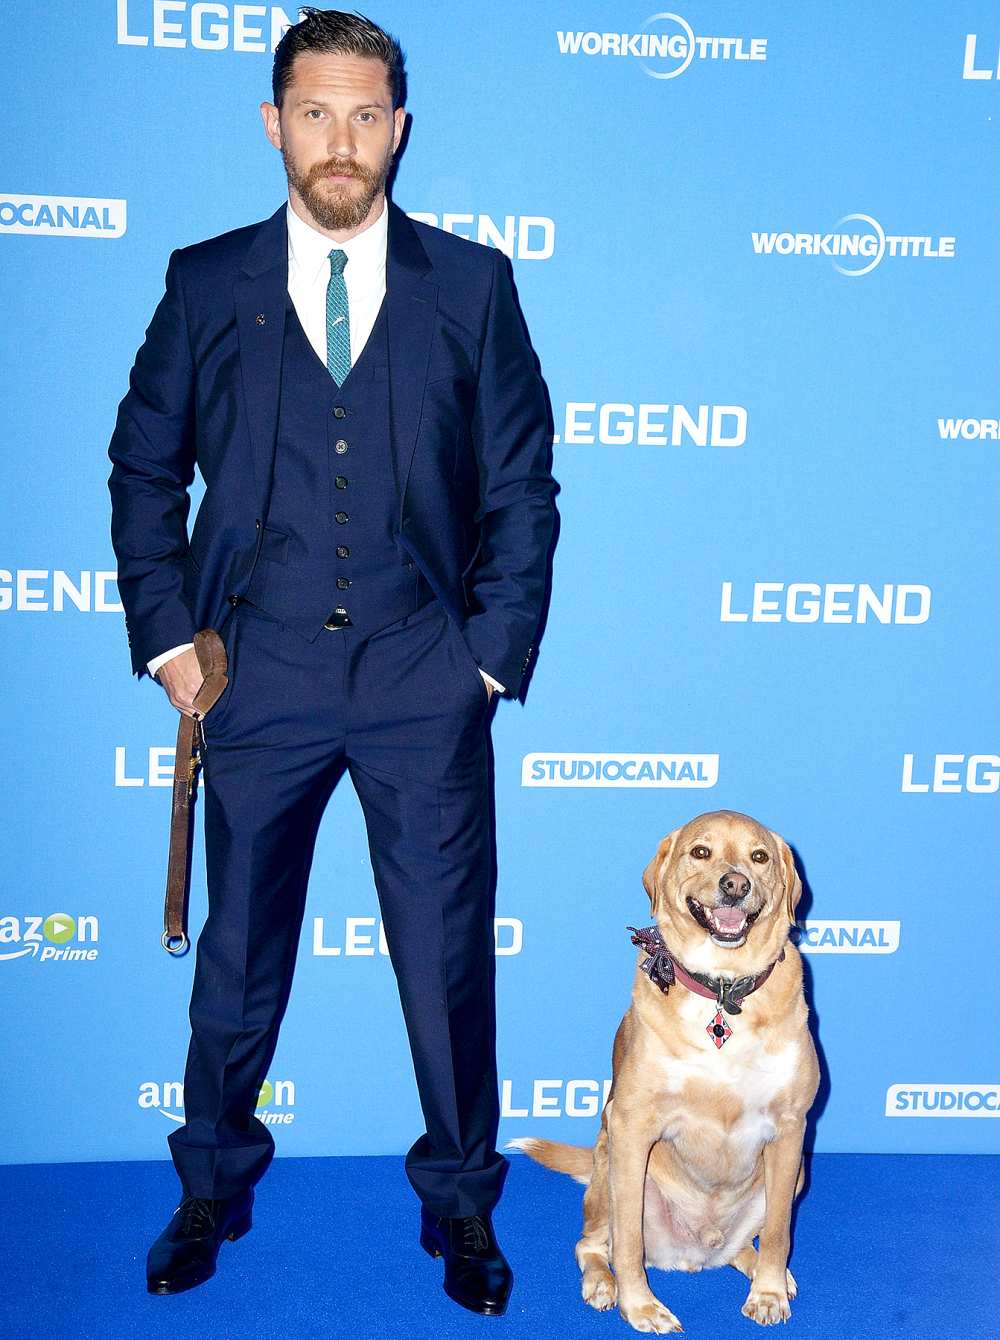 Tom Hardy and his dog Woody attend the UK Premiere of "Legend" at Odeon Leicester Square on September 3, 2015 in London, England.